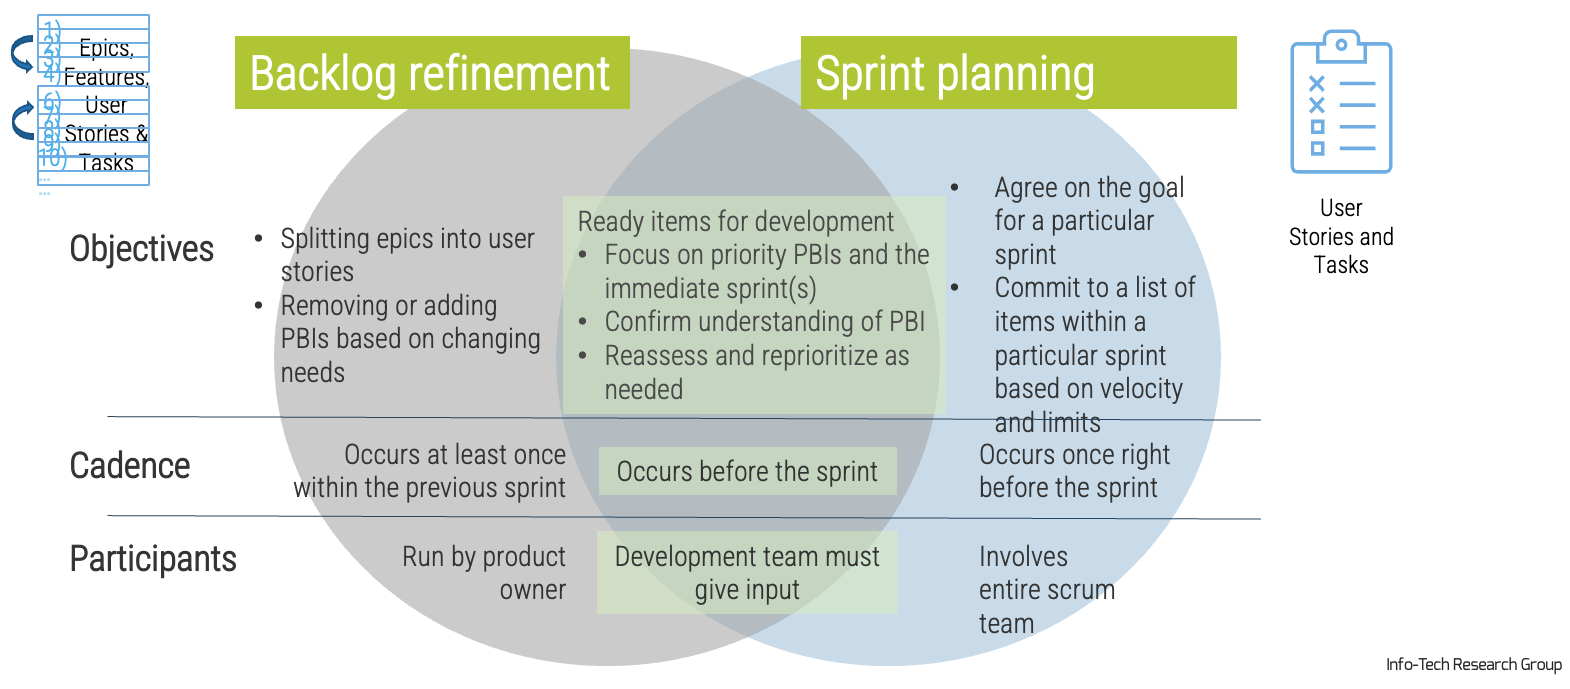 Backlog refinement versus Sprint planning. Differences in Objectives, Cadence and Participants